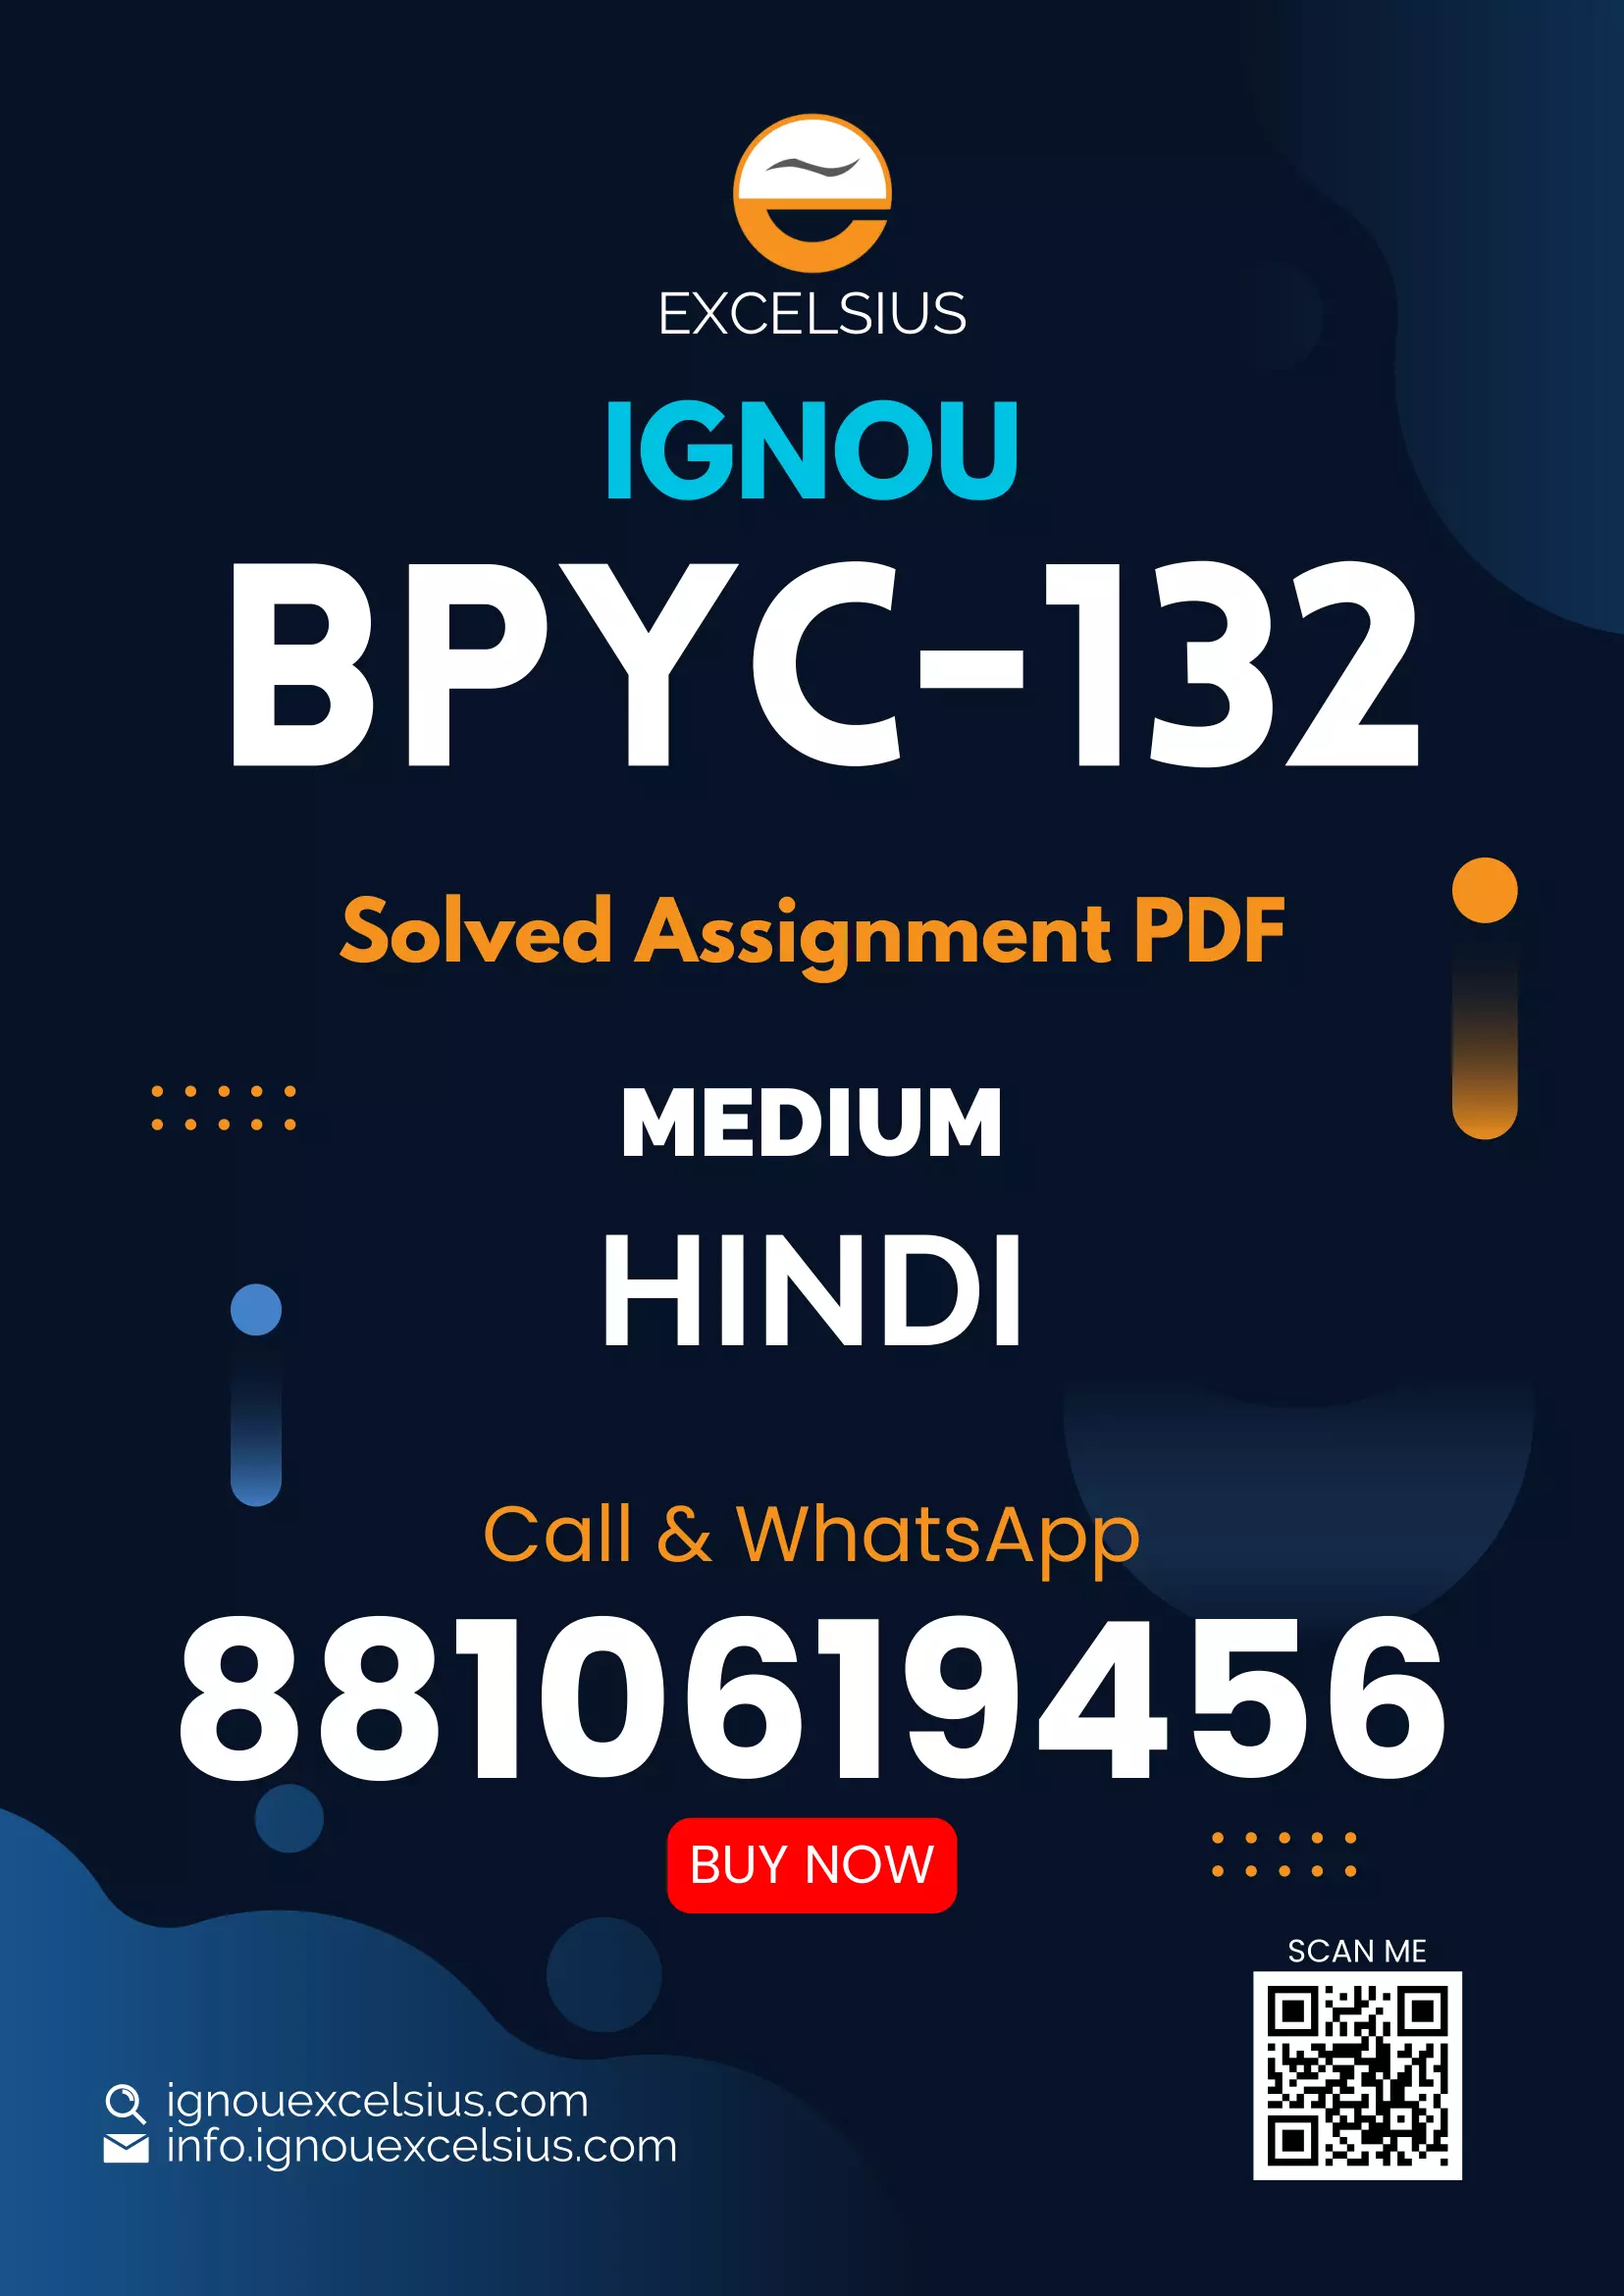 IGNOU BPYC-132 - Ethics, Latest Solved Assignment-July 2022 - January 2023